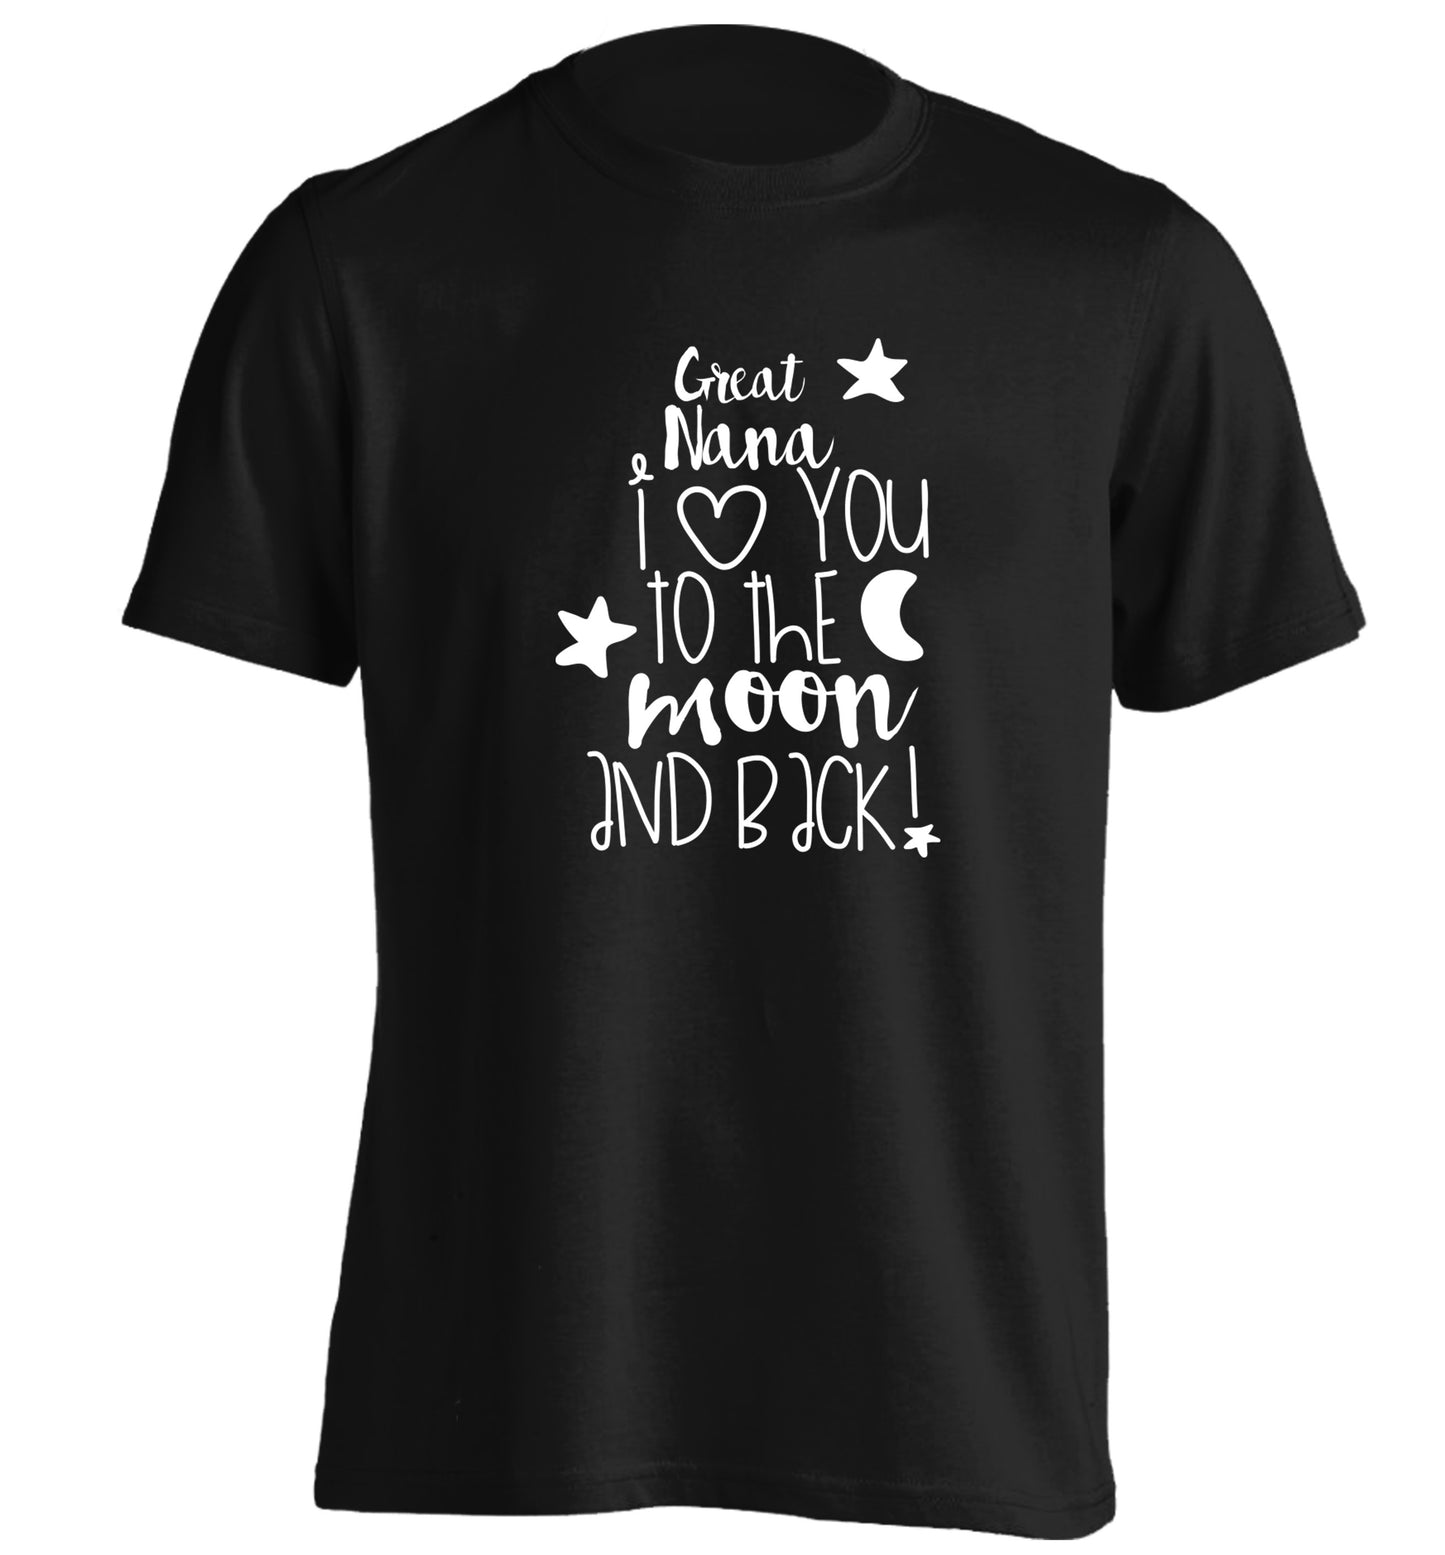 Great Nana I love you to the moon and back adults unisex black Tshirt 2XL